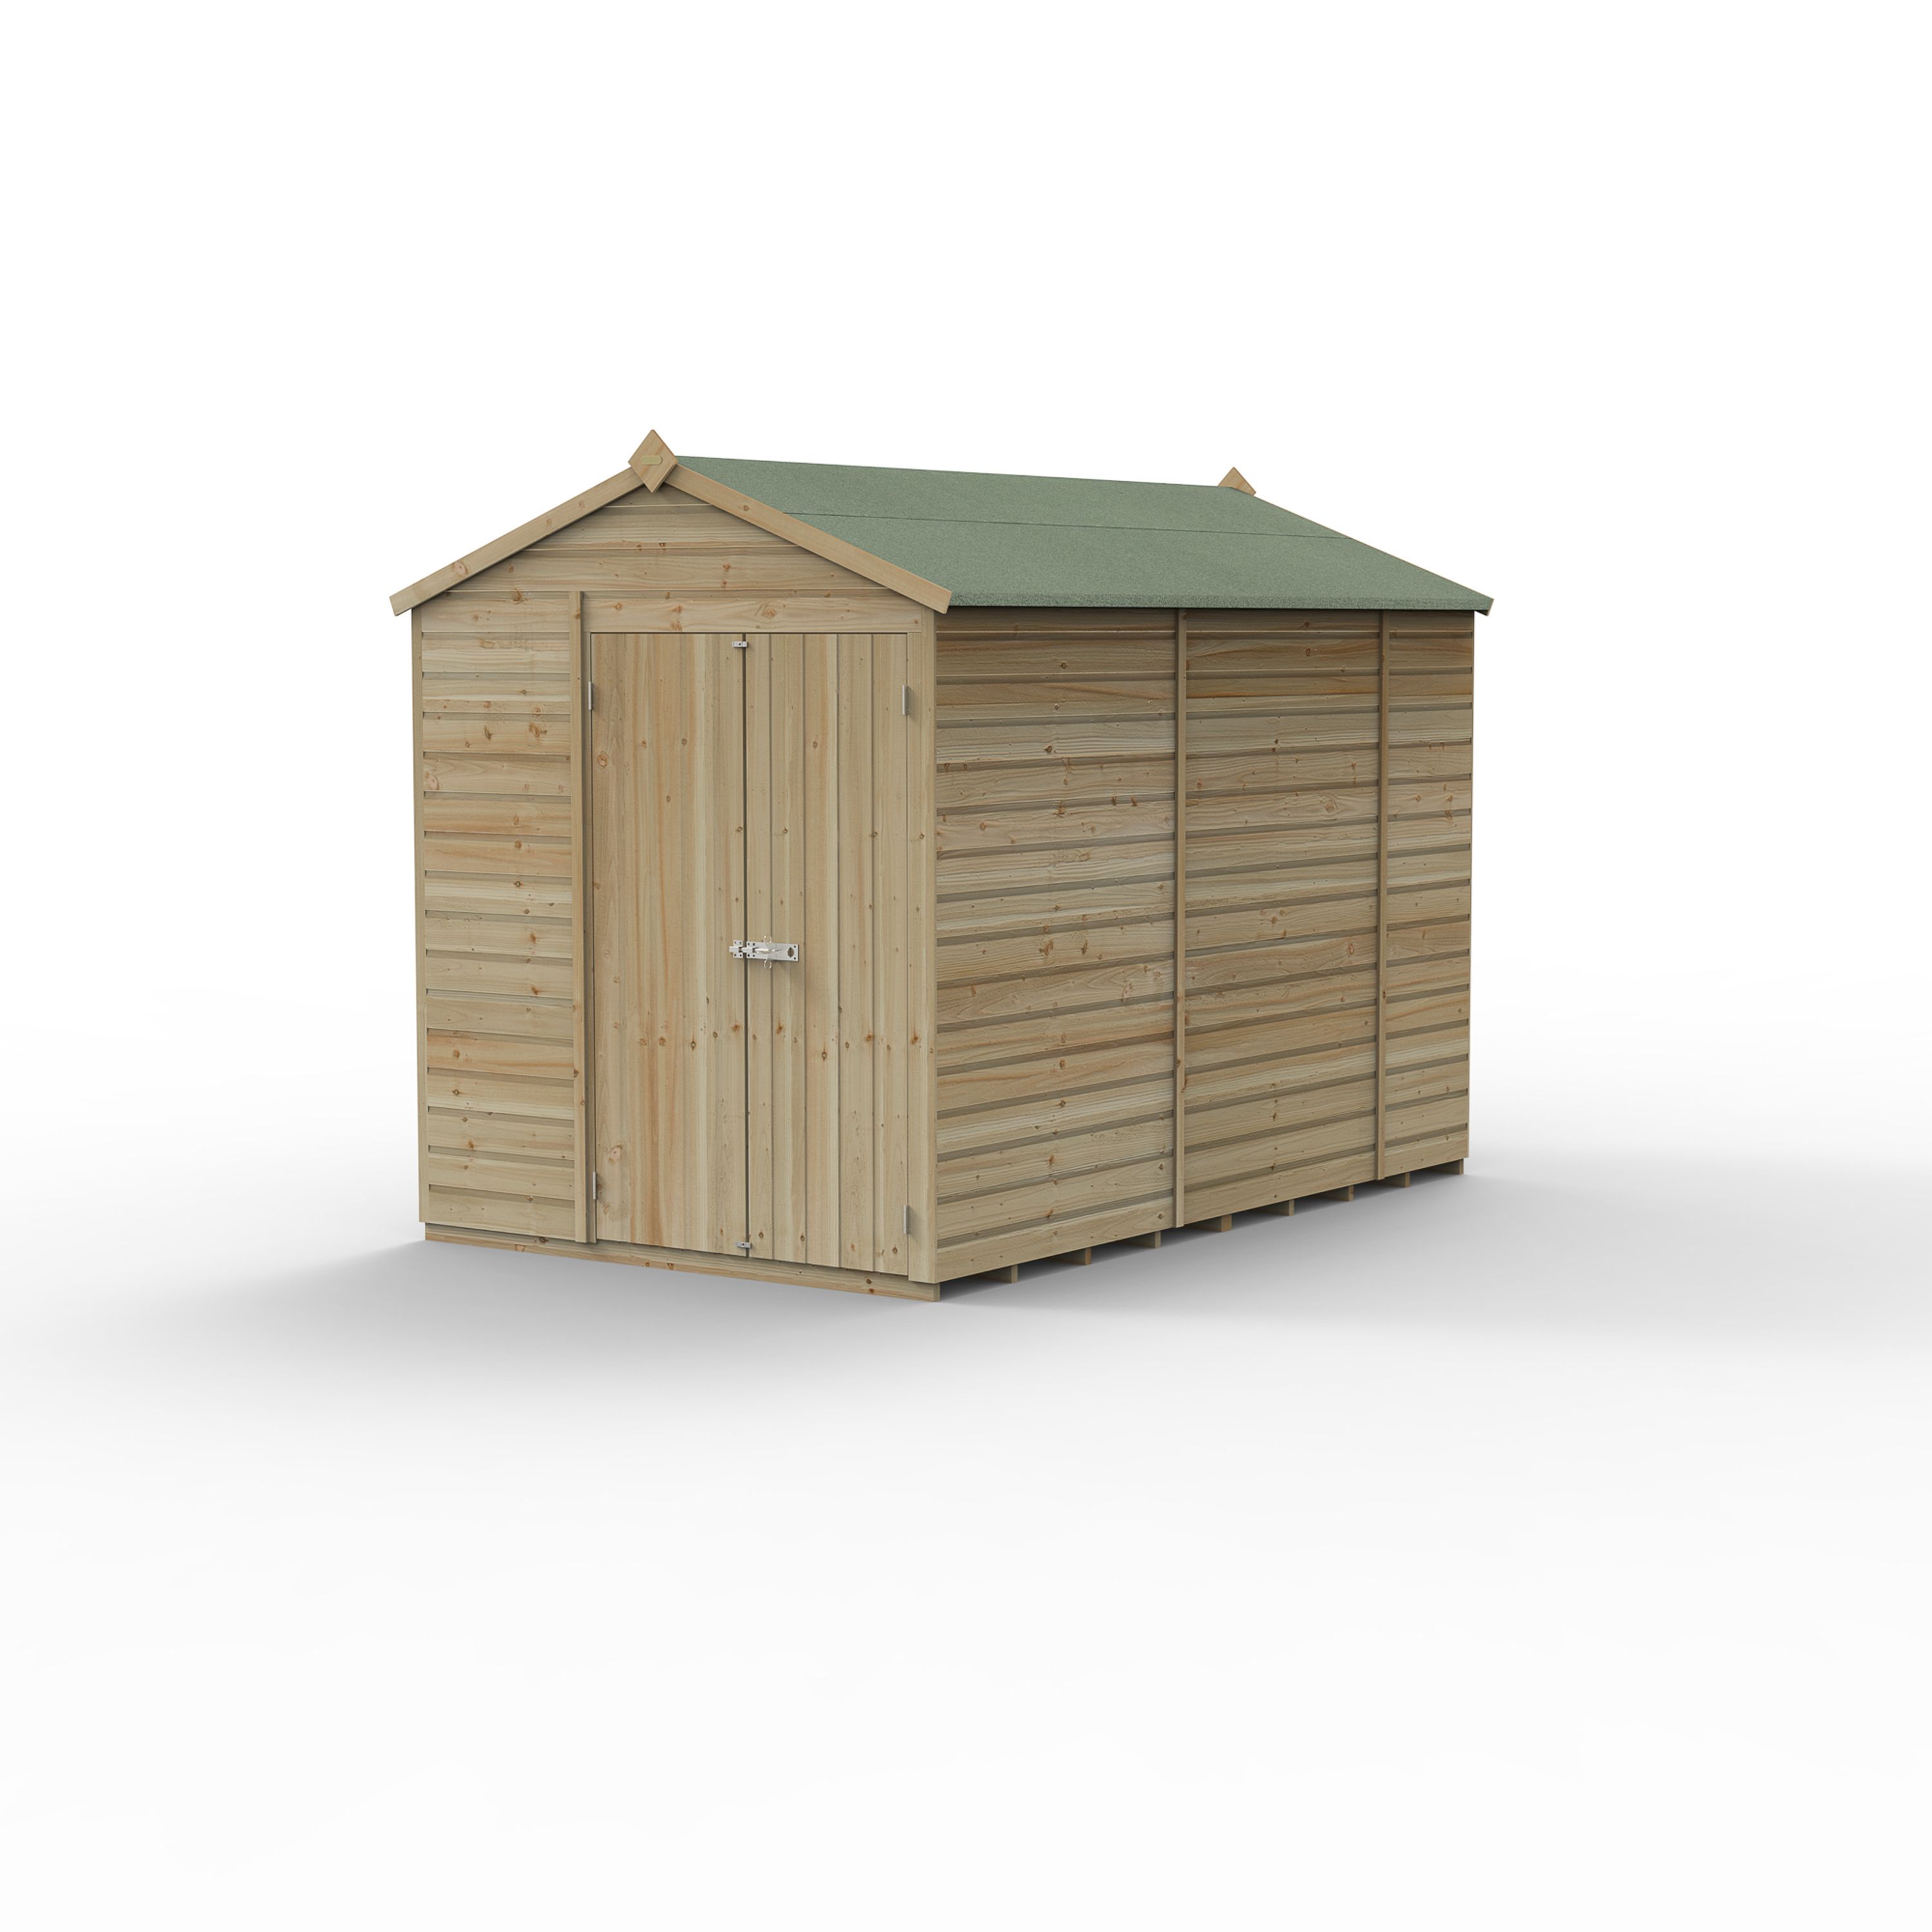 Forest Garden Beckwood 10x6 ft Apex Natural timber Wooden 2 door Shed with floor